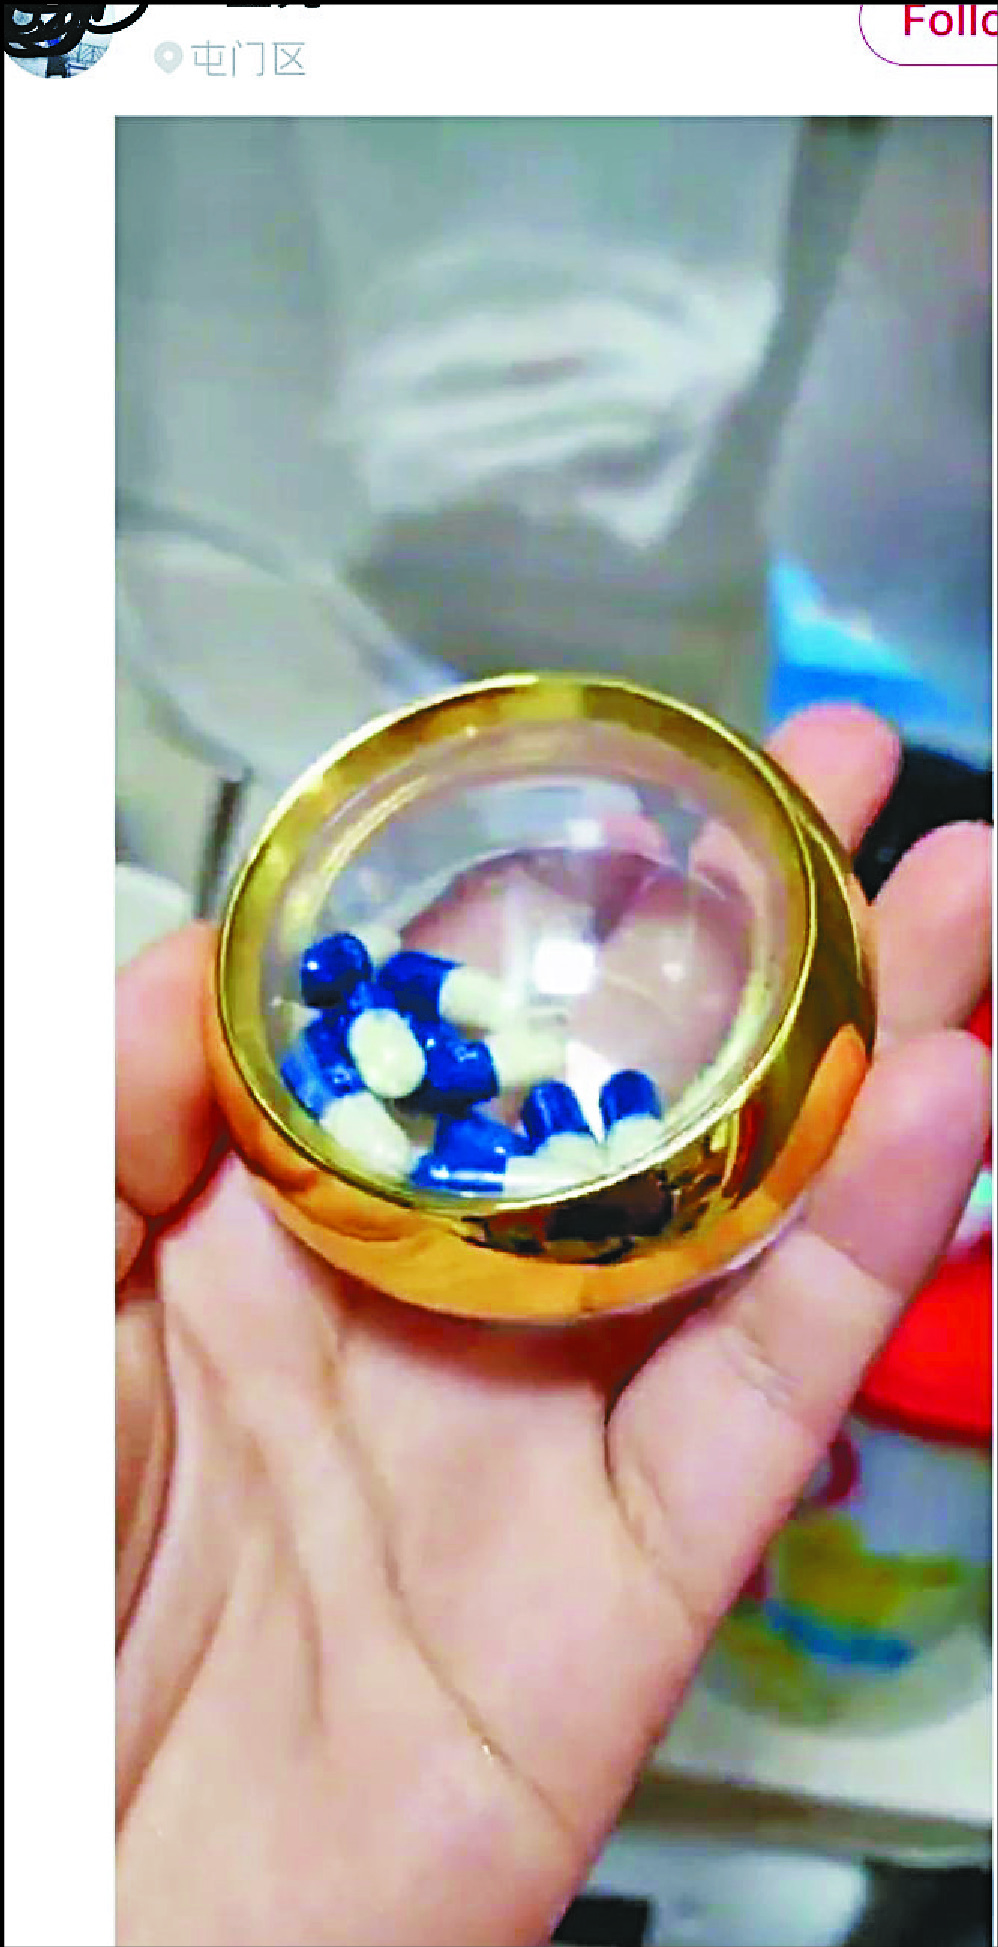 Police raid clinic at the guts of diet pill racket